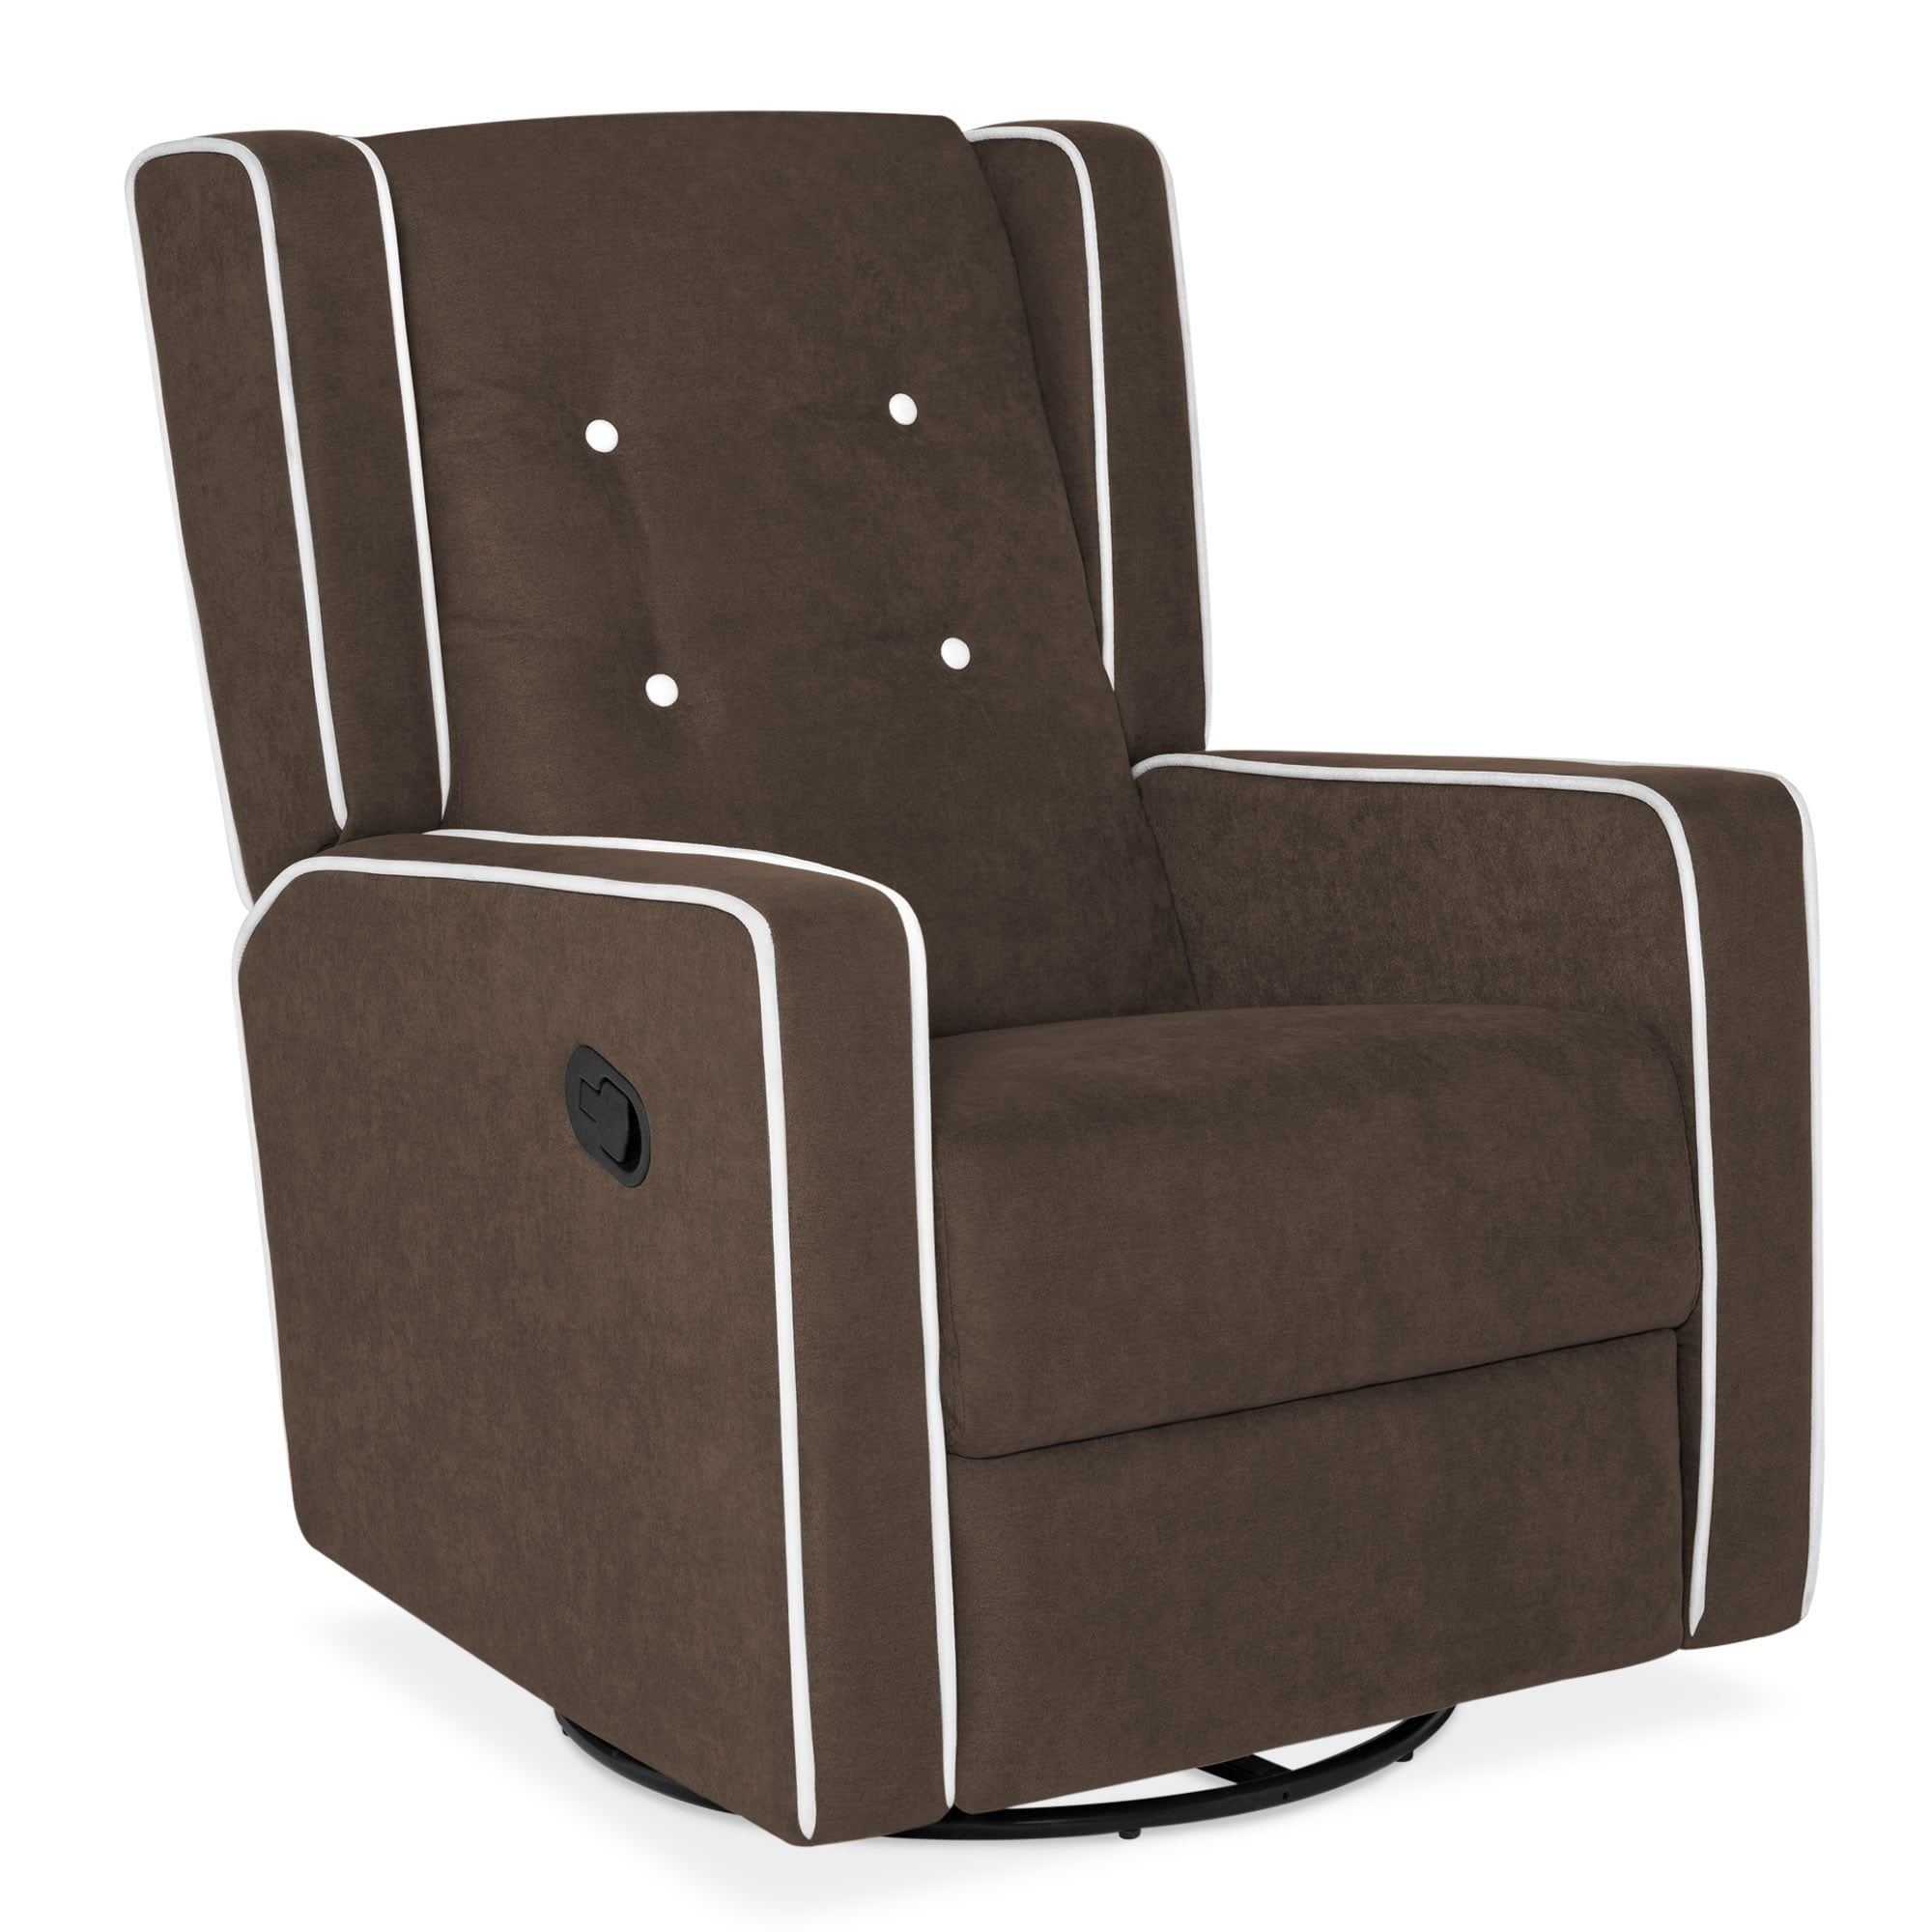 Best Choice Products Mid Century Tufted Velvet Upholstered Recliner Within Modern Velvet Upholstered Recliner Chairs (View 7 of 20)